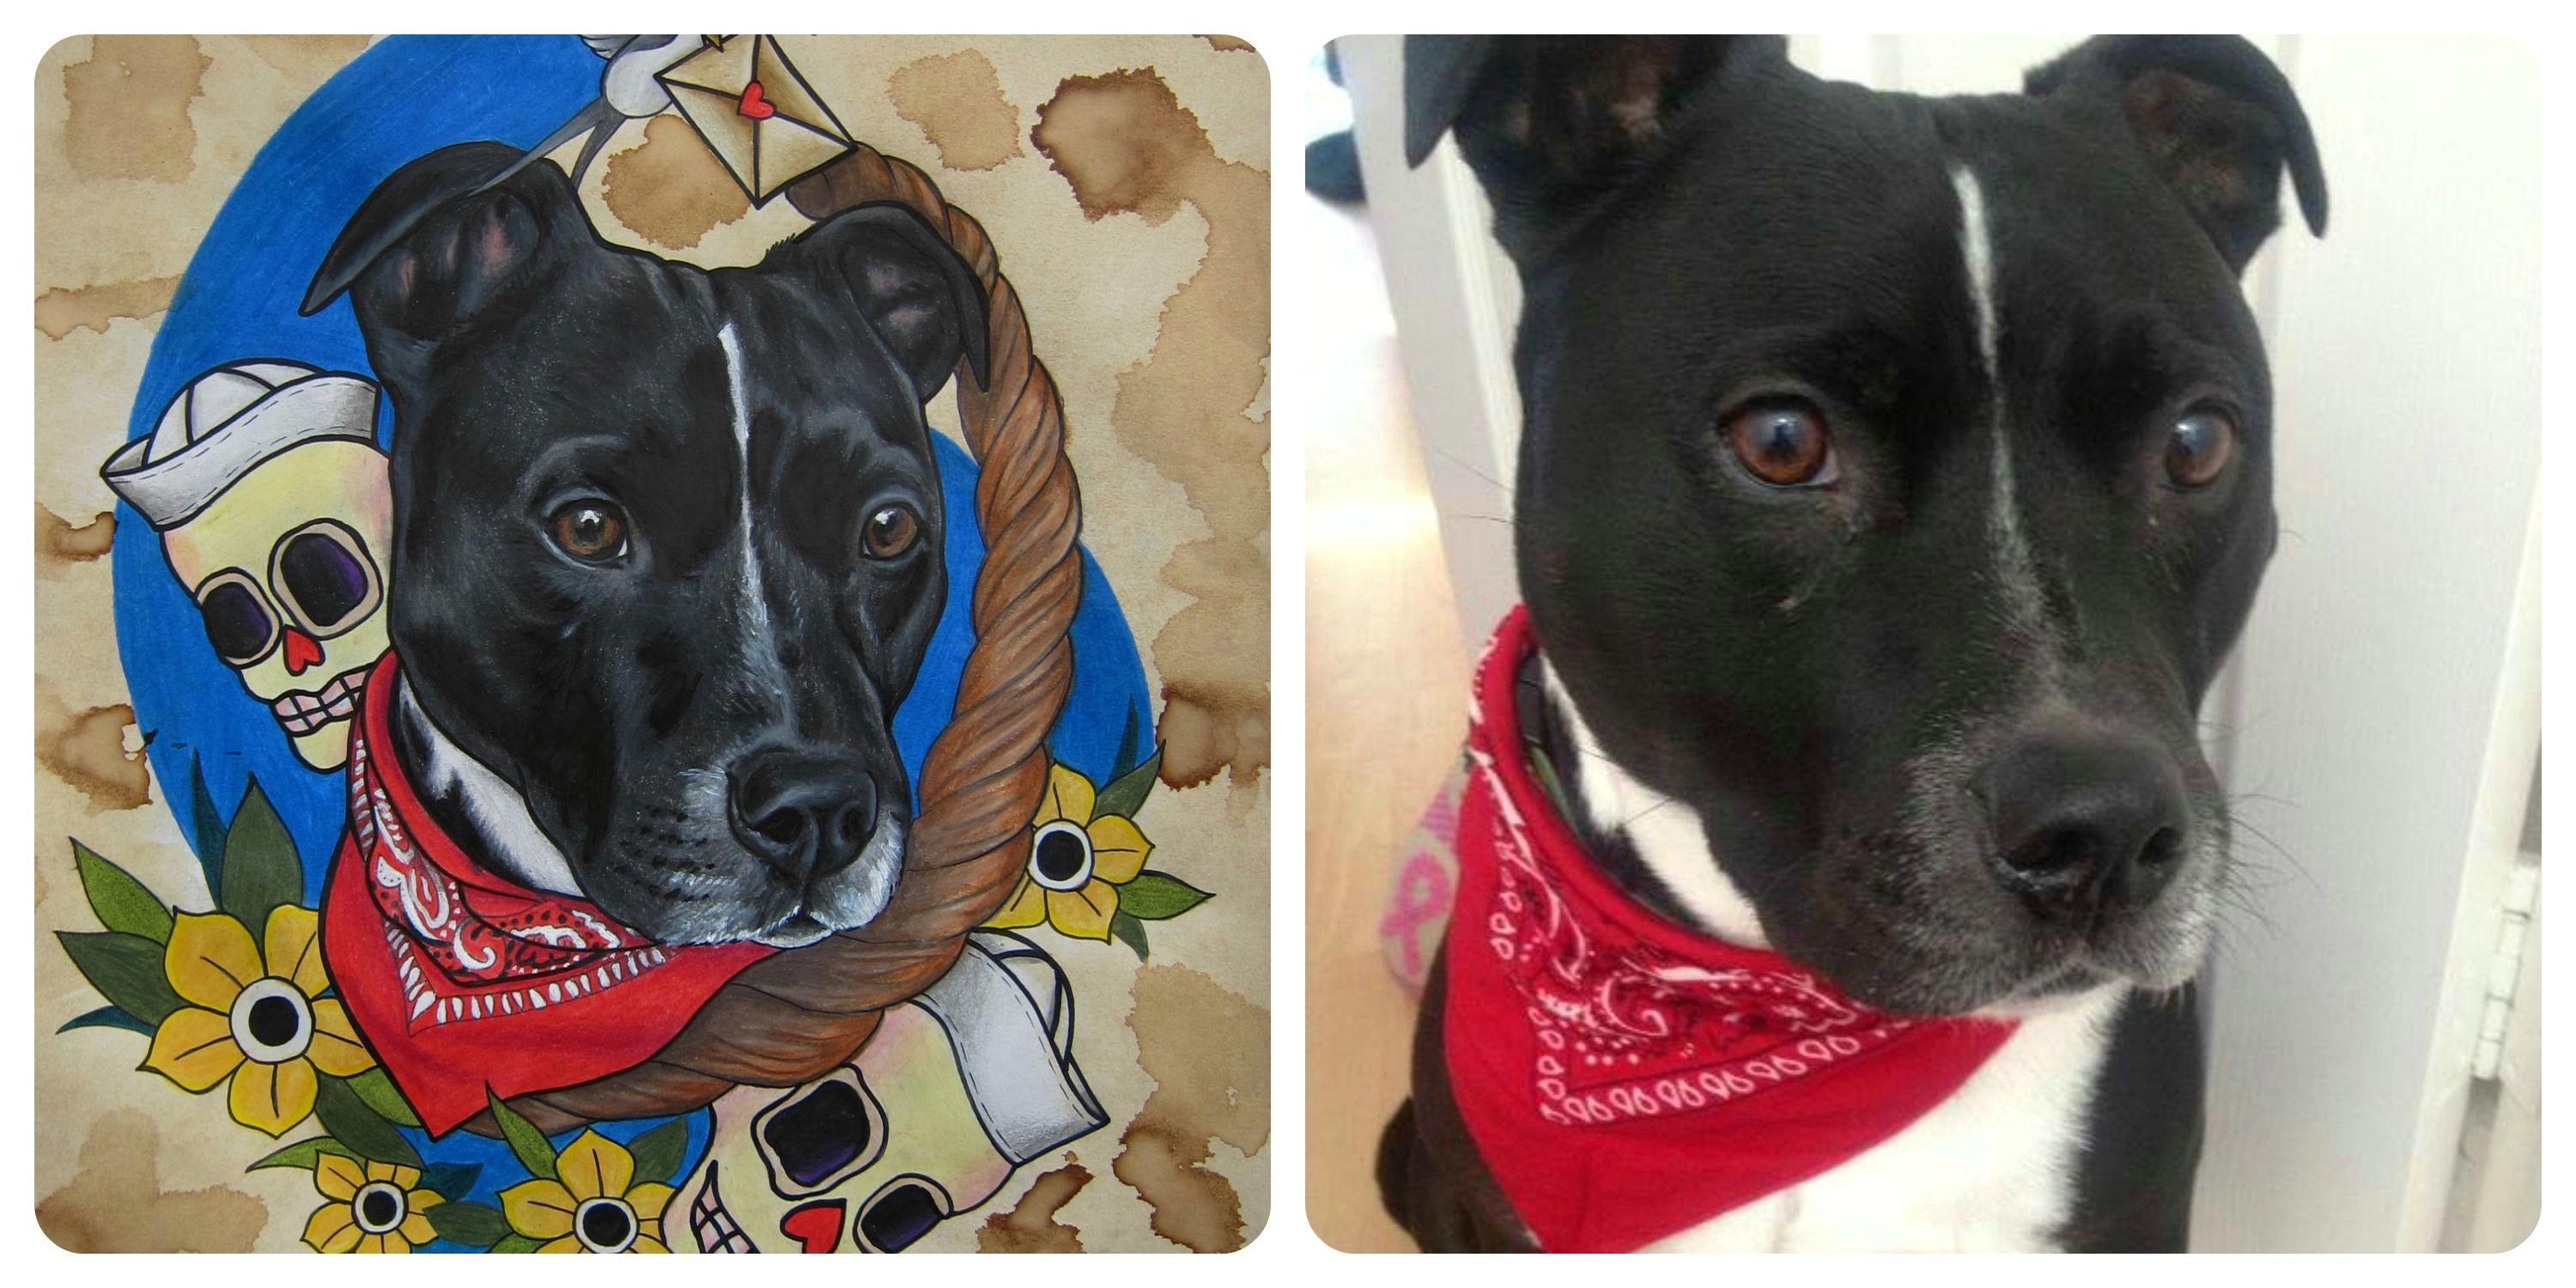 pet portraits done by draw me a monkey to find on facebook instagram and etsy